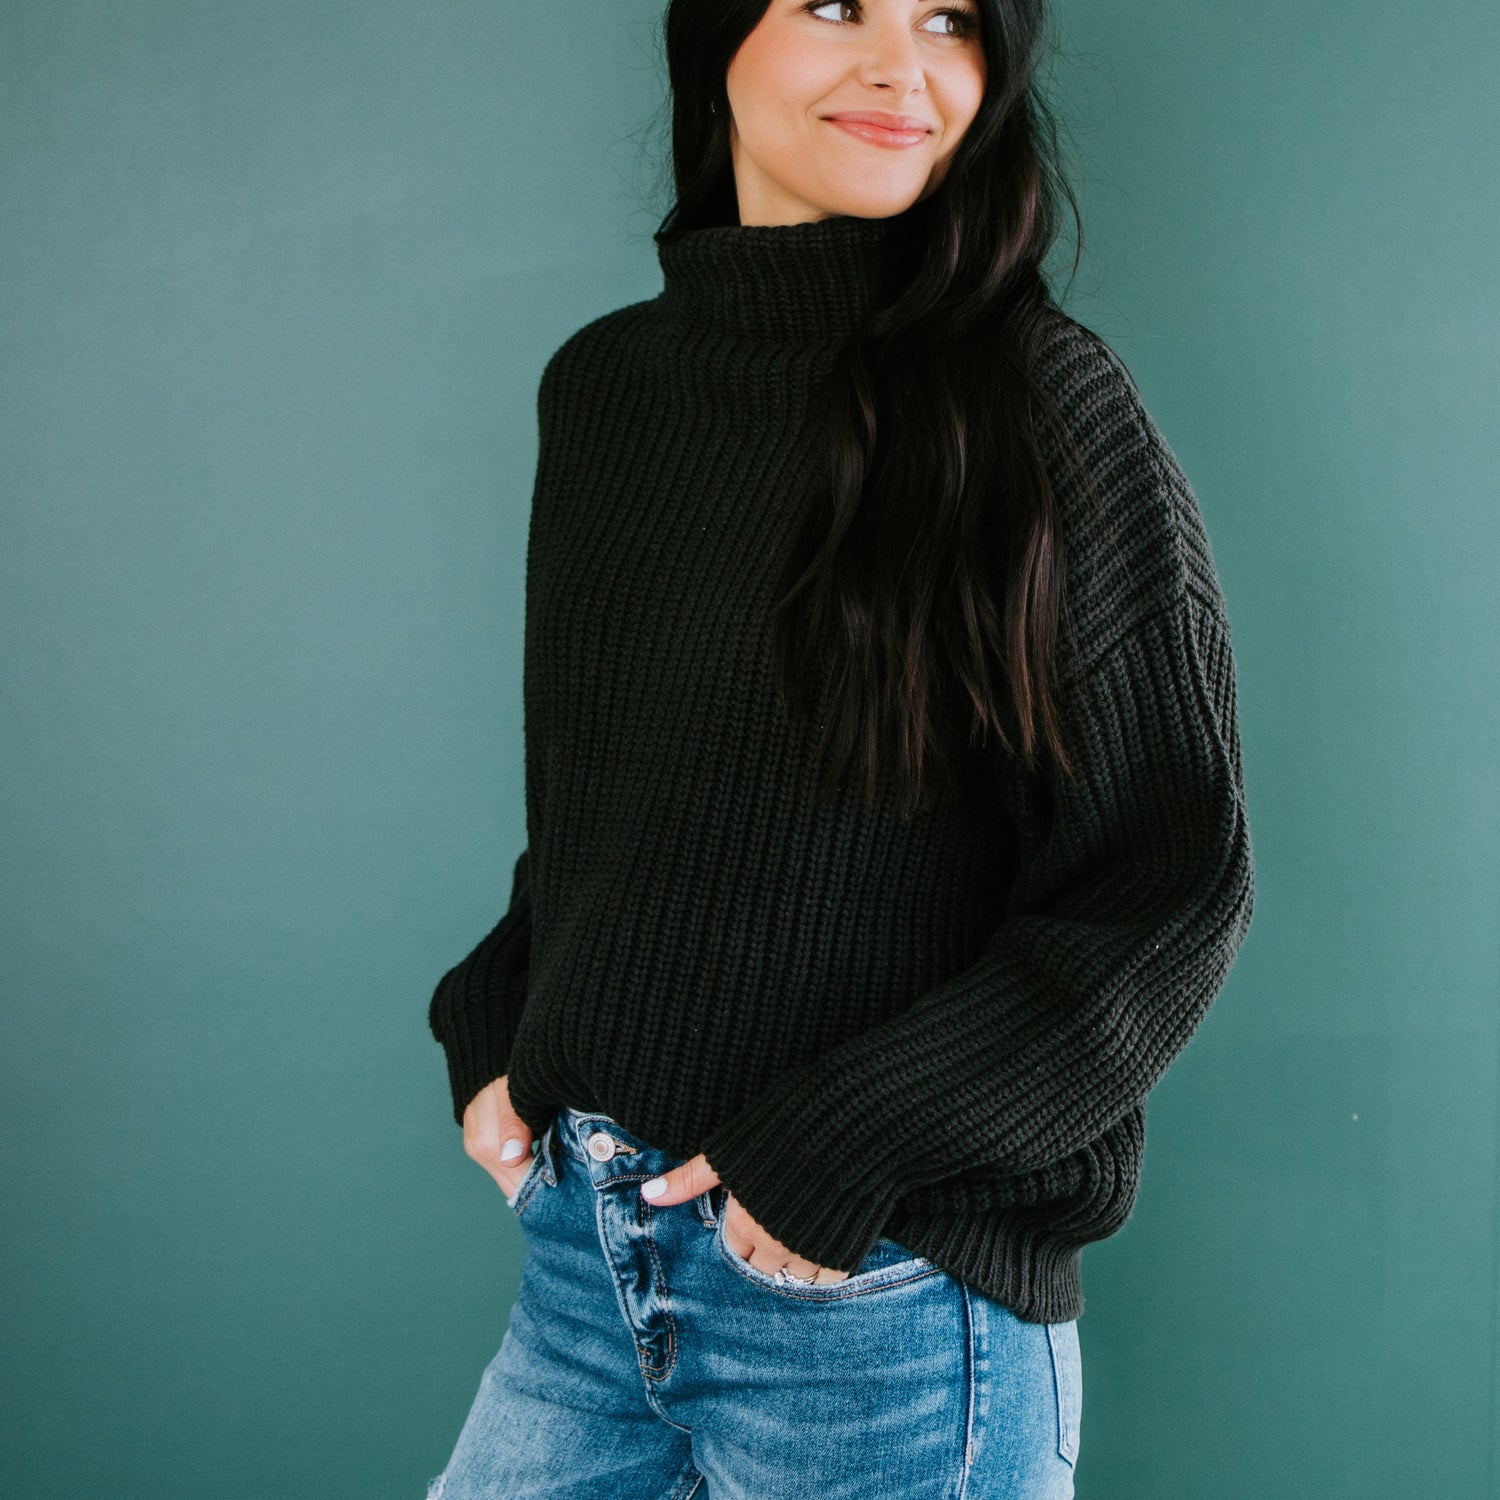 Amherst Funnel Neck Sweater by Chelsea DeBoer